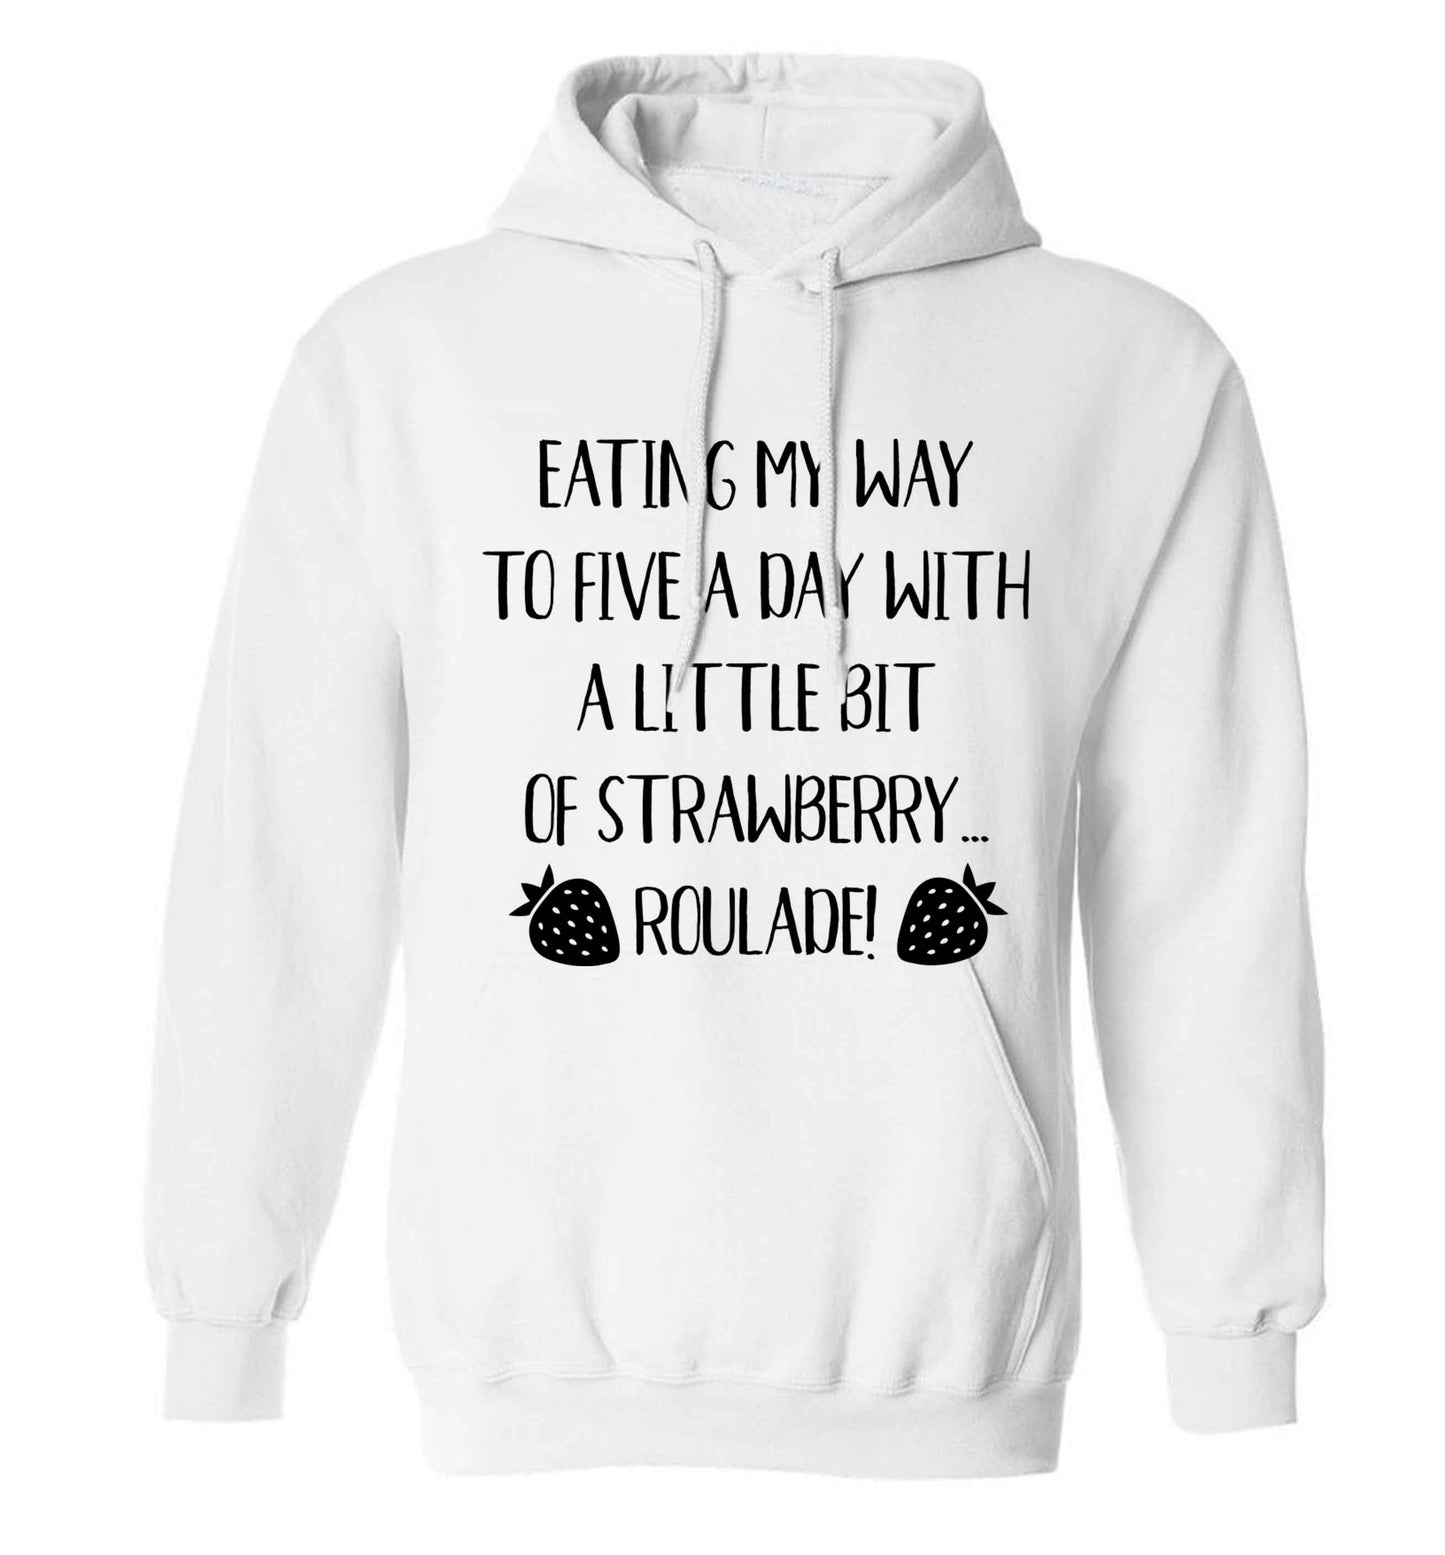 Eating my way to five a day with a little bit of strawberry roulade adults unisex white hoodie 2XL